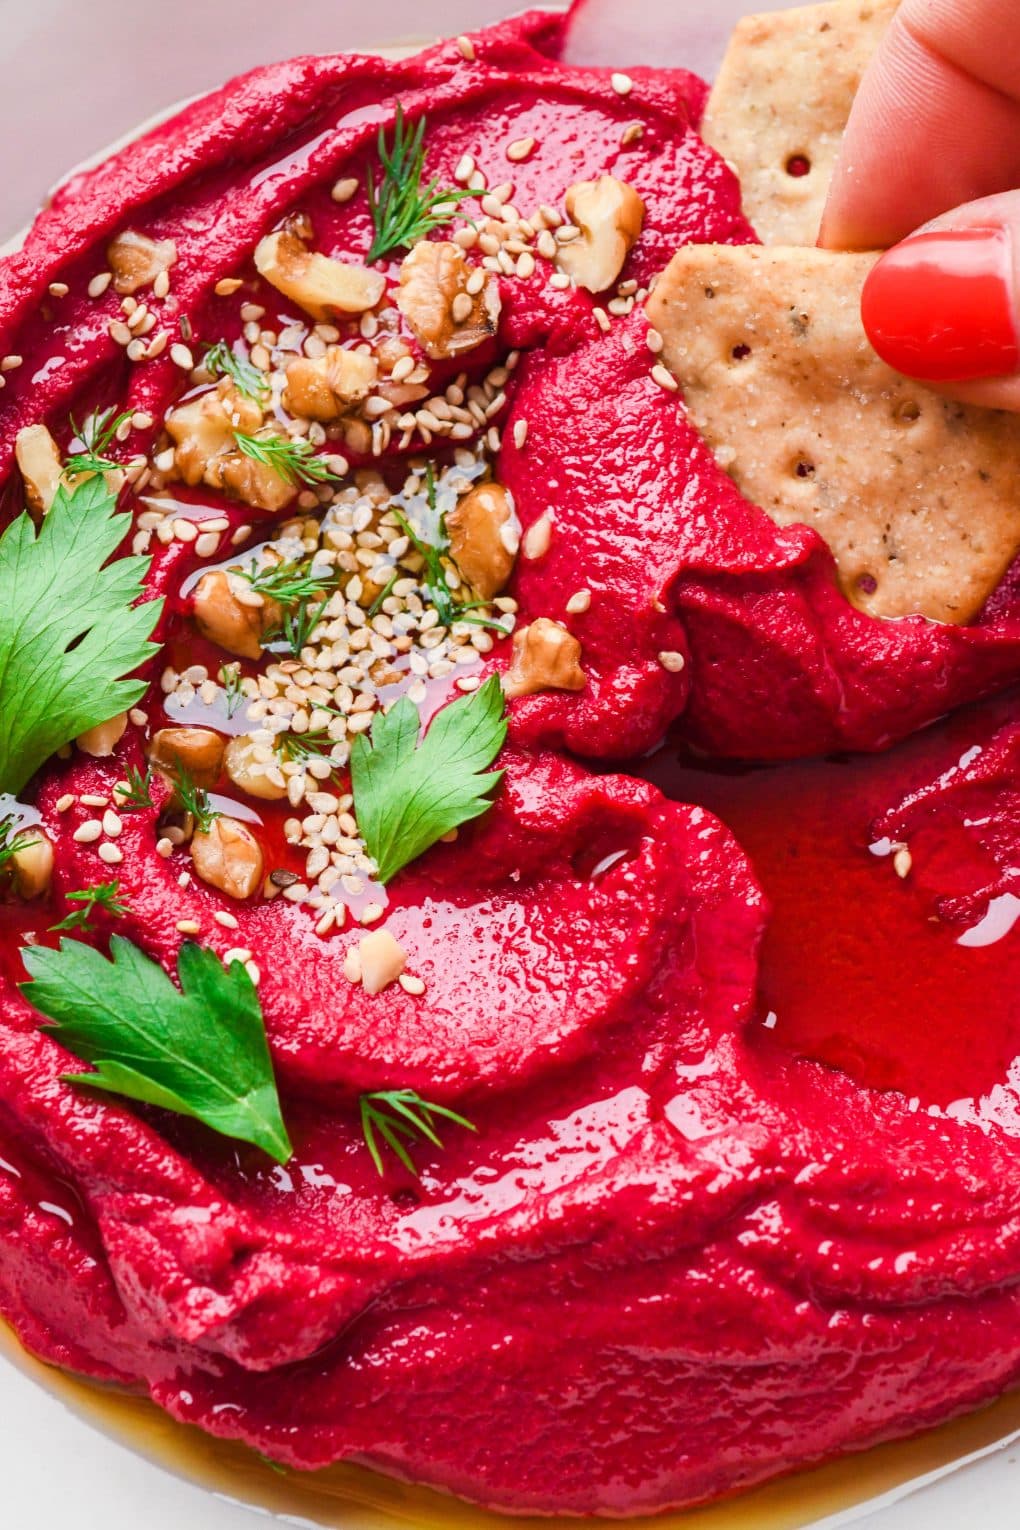 Bright red cashew beet dip in a shallow bowl topped with nuts, seeds, and some fresh herbs with a hand dipping a cracker into the creamy dip.